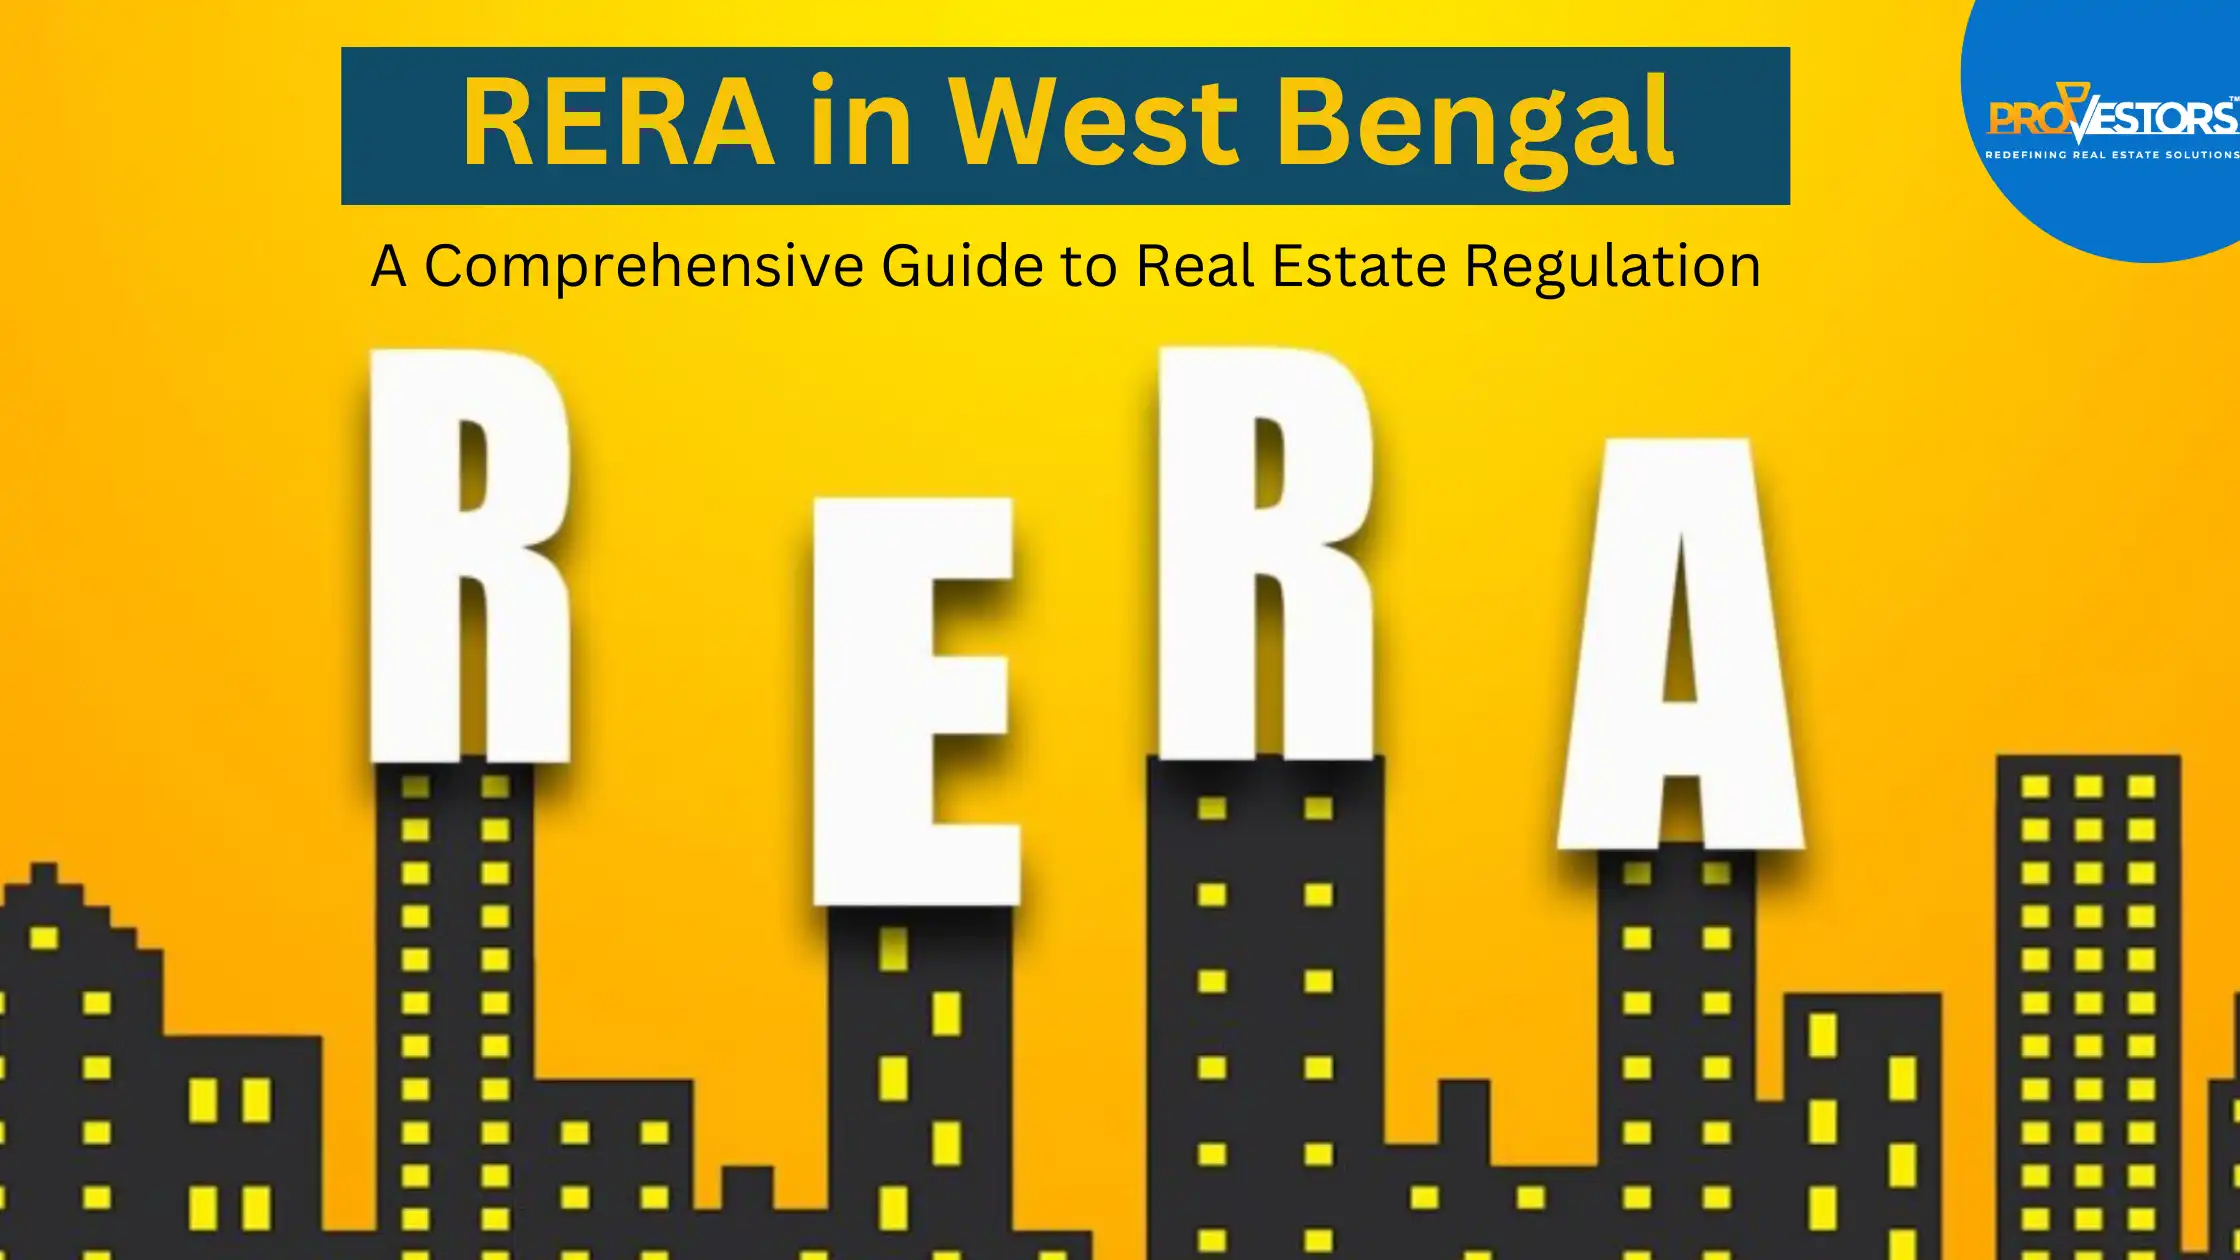 RERA in West Bengal: A Comprehensive Guide to Real Estate Regulation